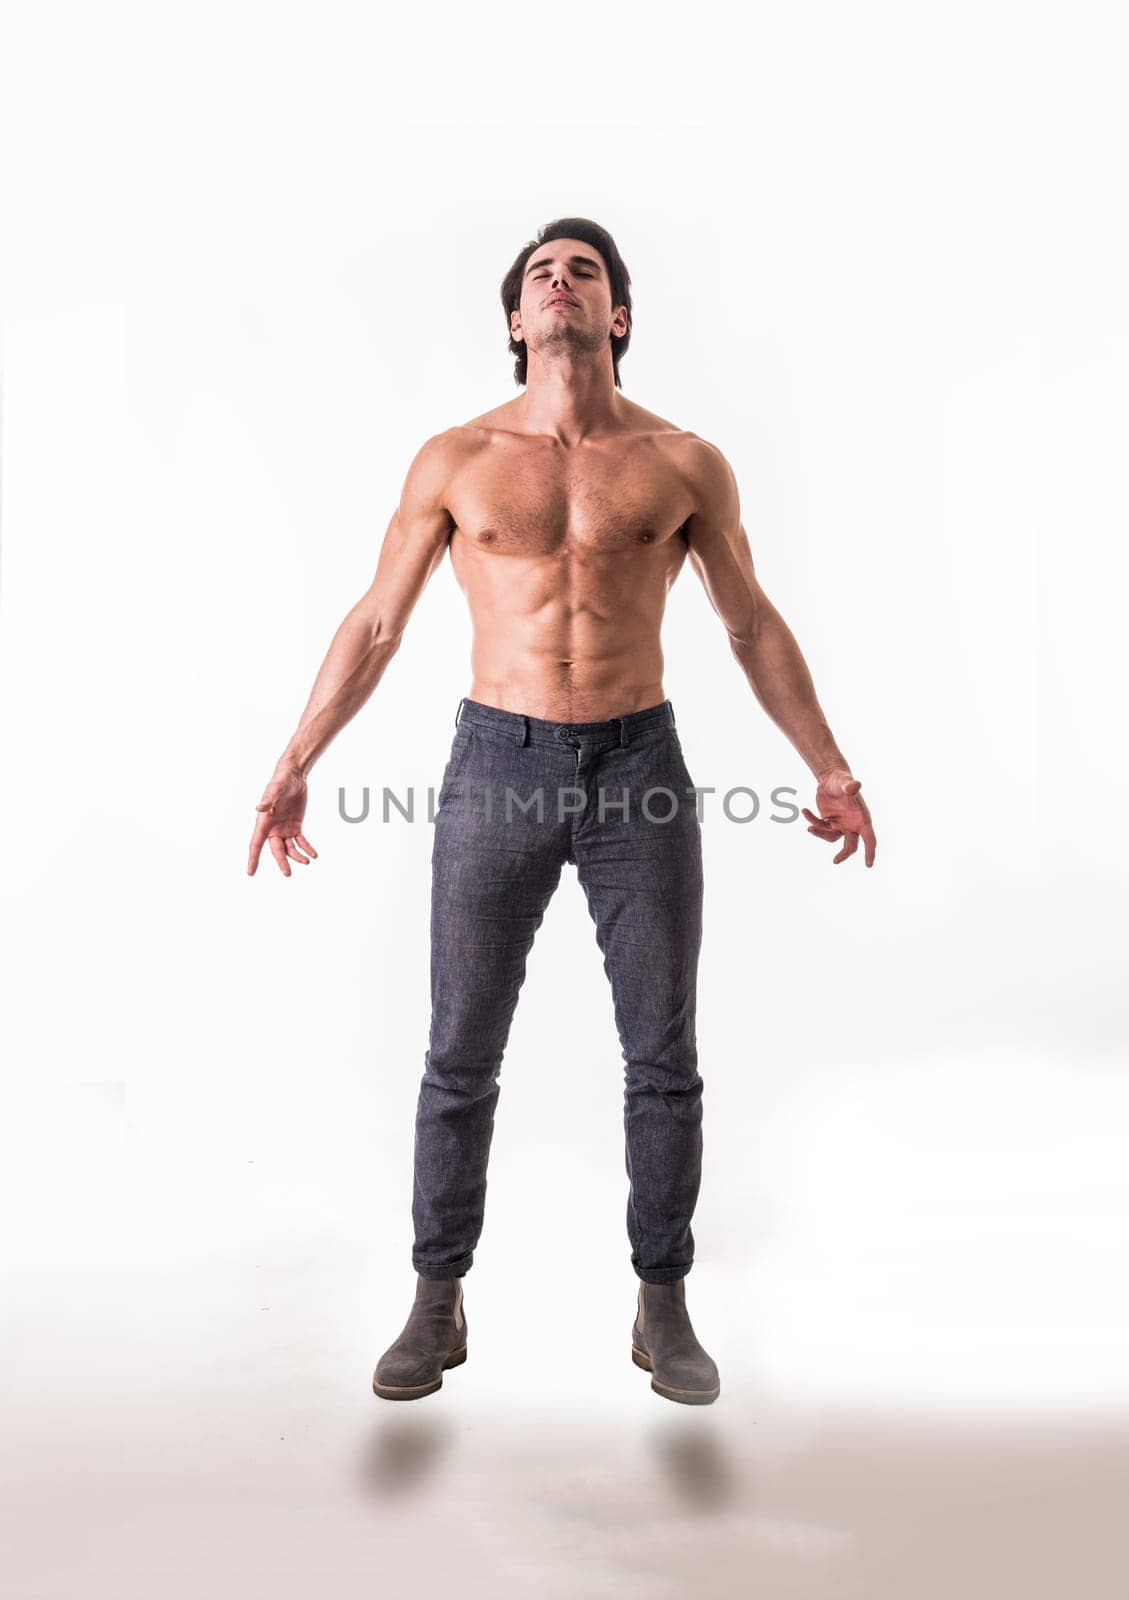 Photo of a shirtless man defying gravity in mid-air by artofphoto